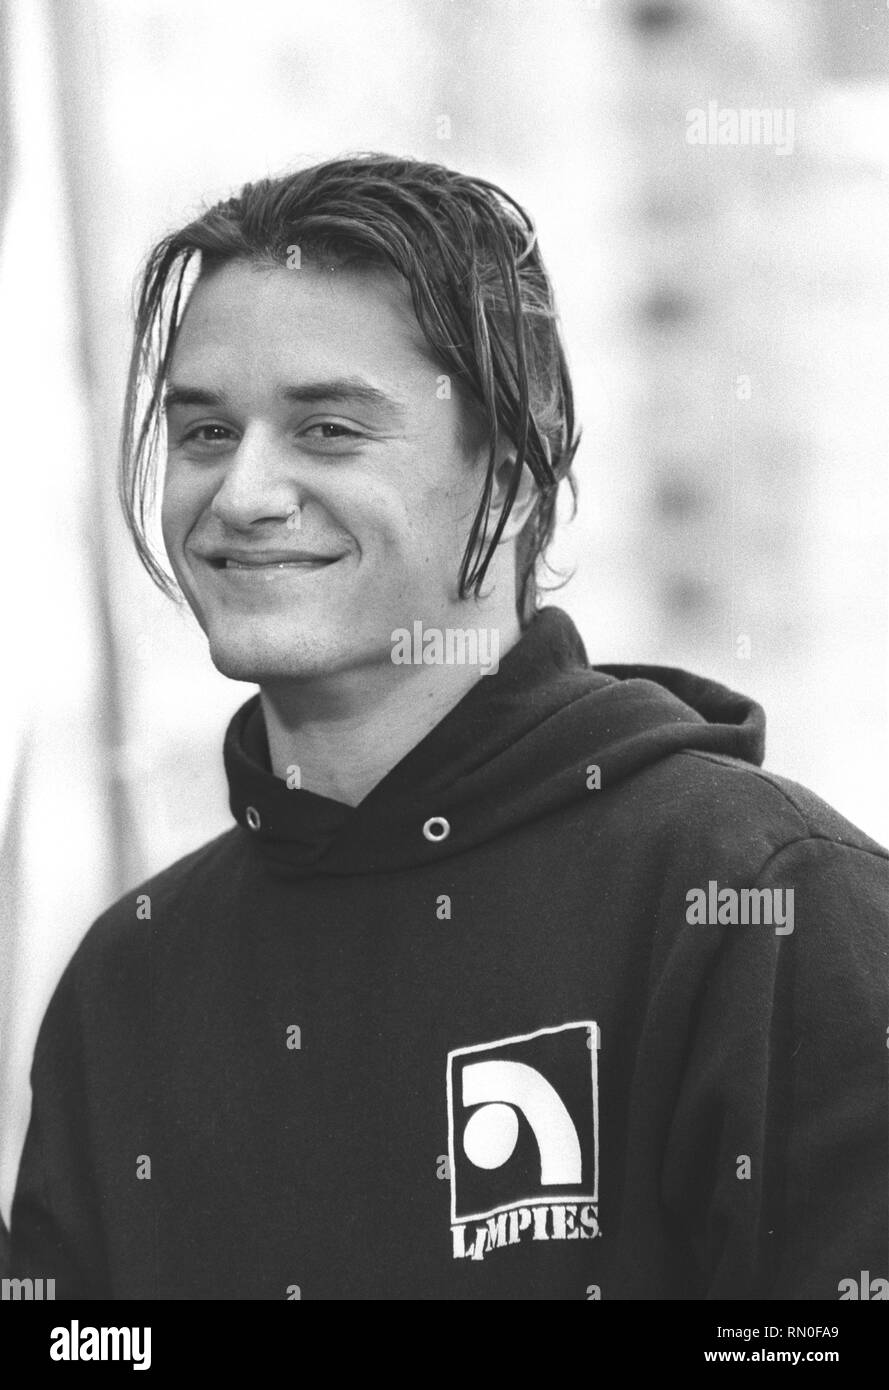 Singer Mike Patton of the rock band Faith No More is shown during a press conference at Rock In Rio II. Stock Photo